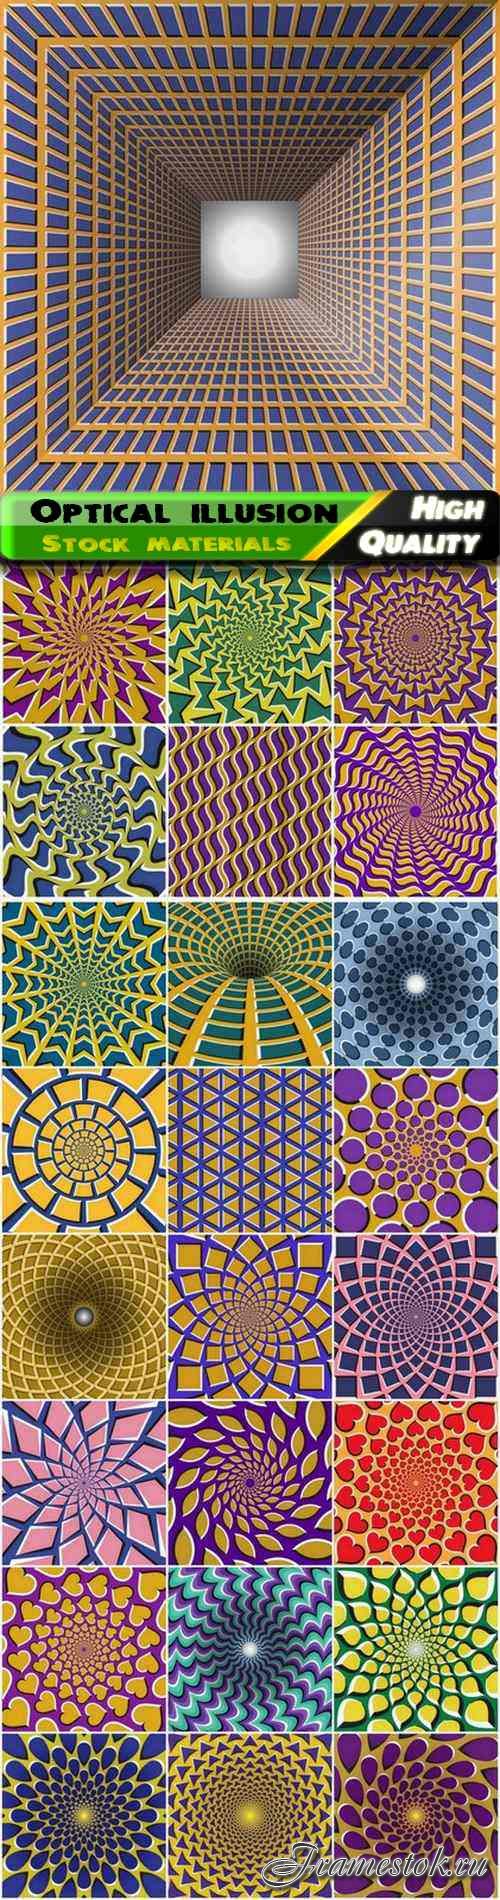 Abstract creative psychedelic background with optical illusion 25 Eps